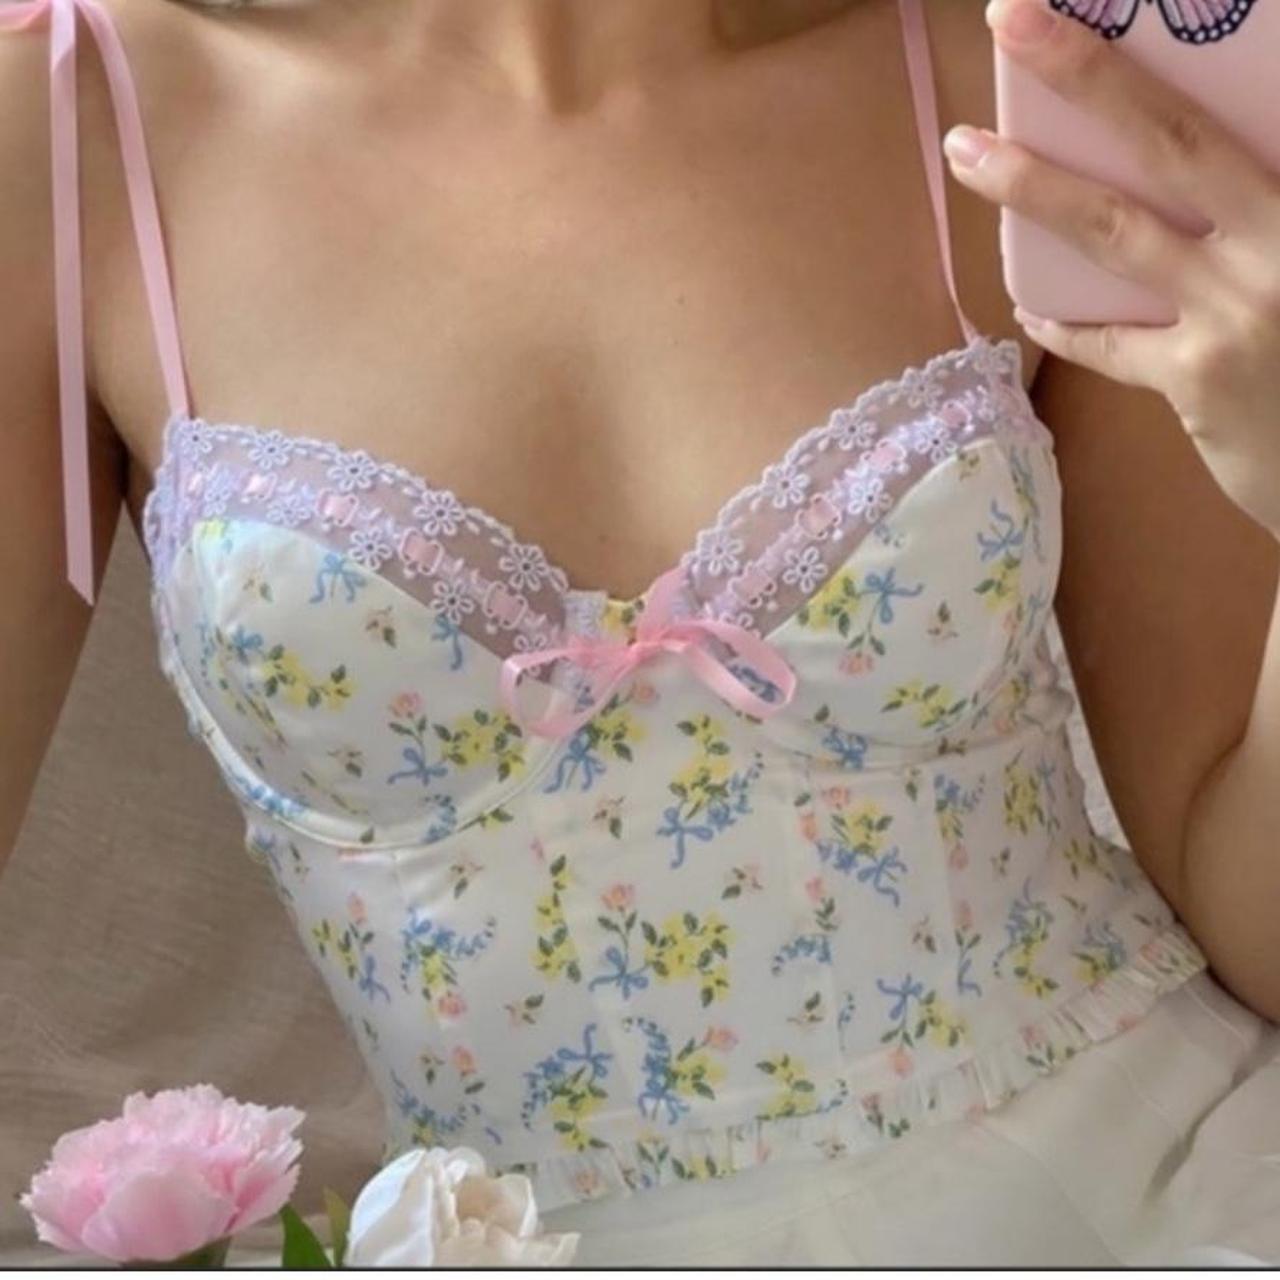 For Love & Lemons, Tainted Bustier Top in Rose